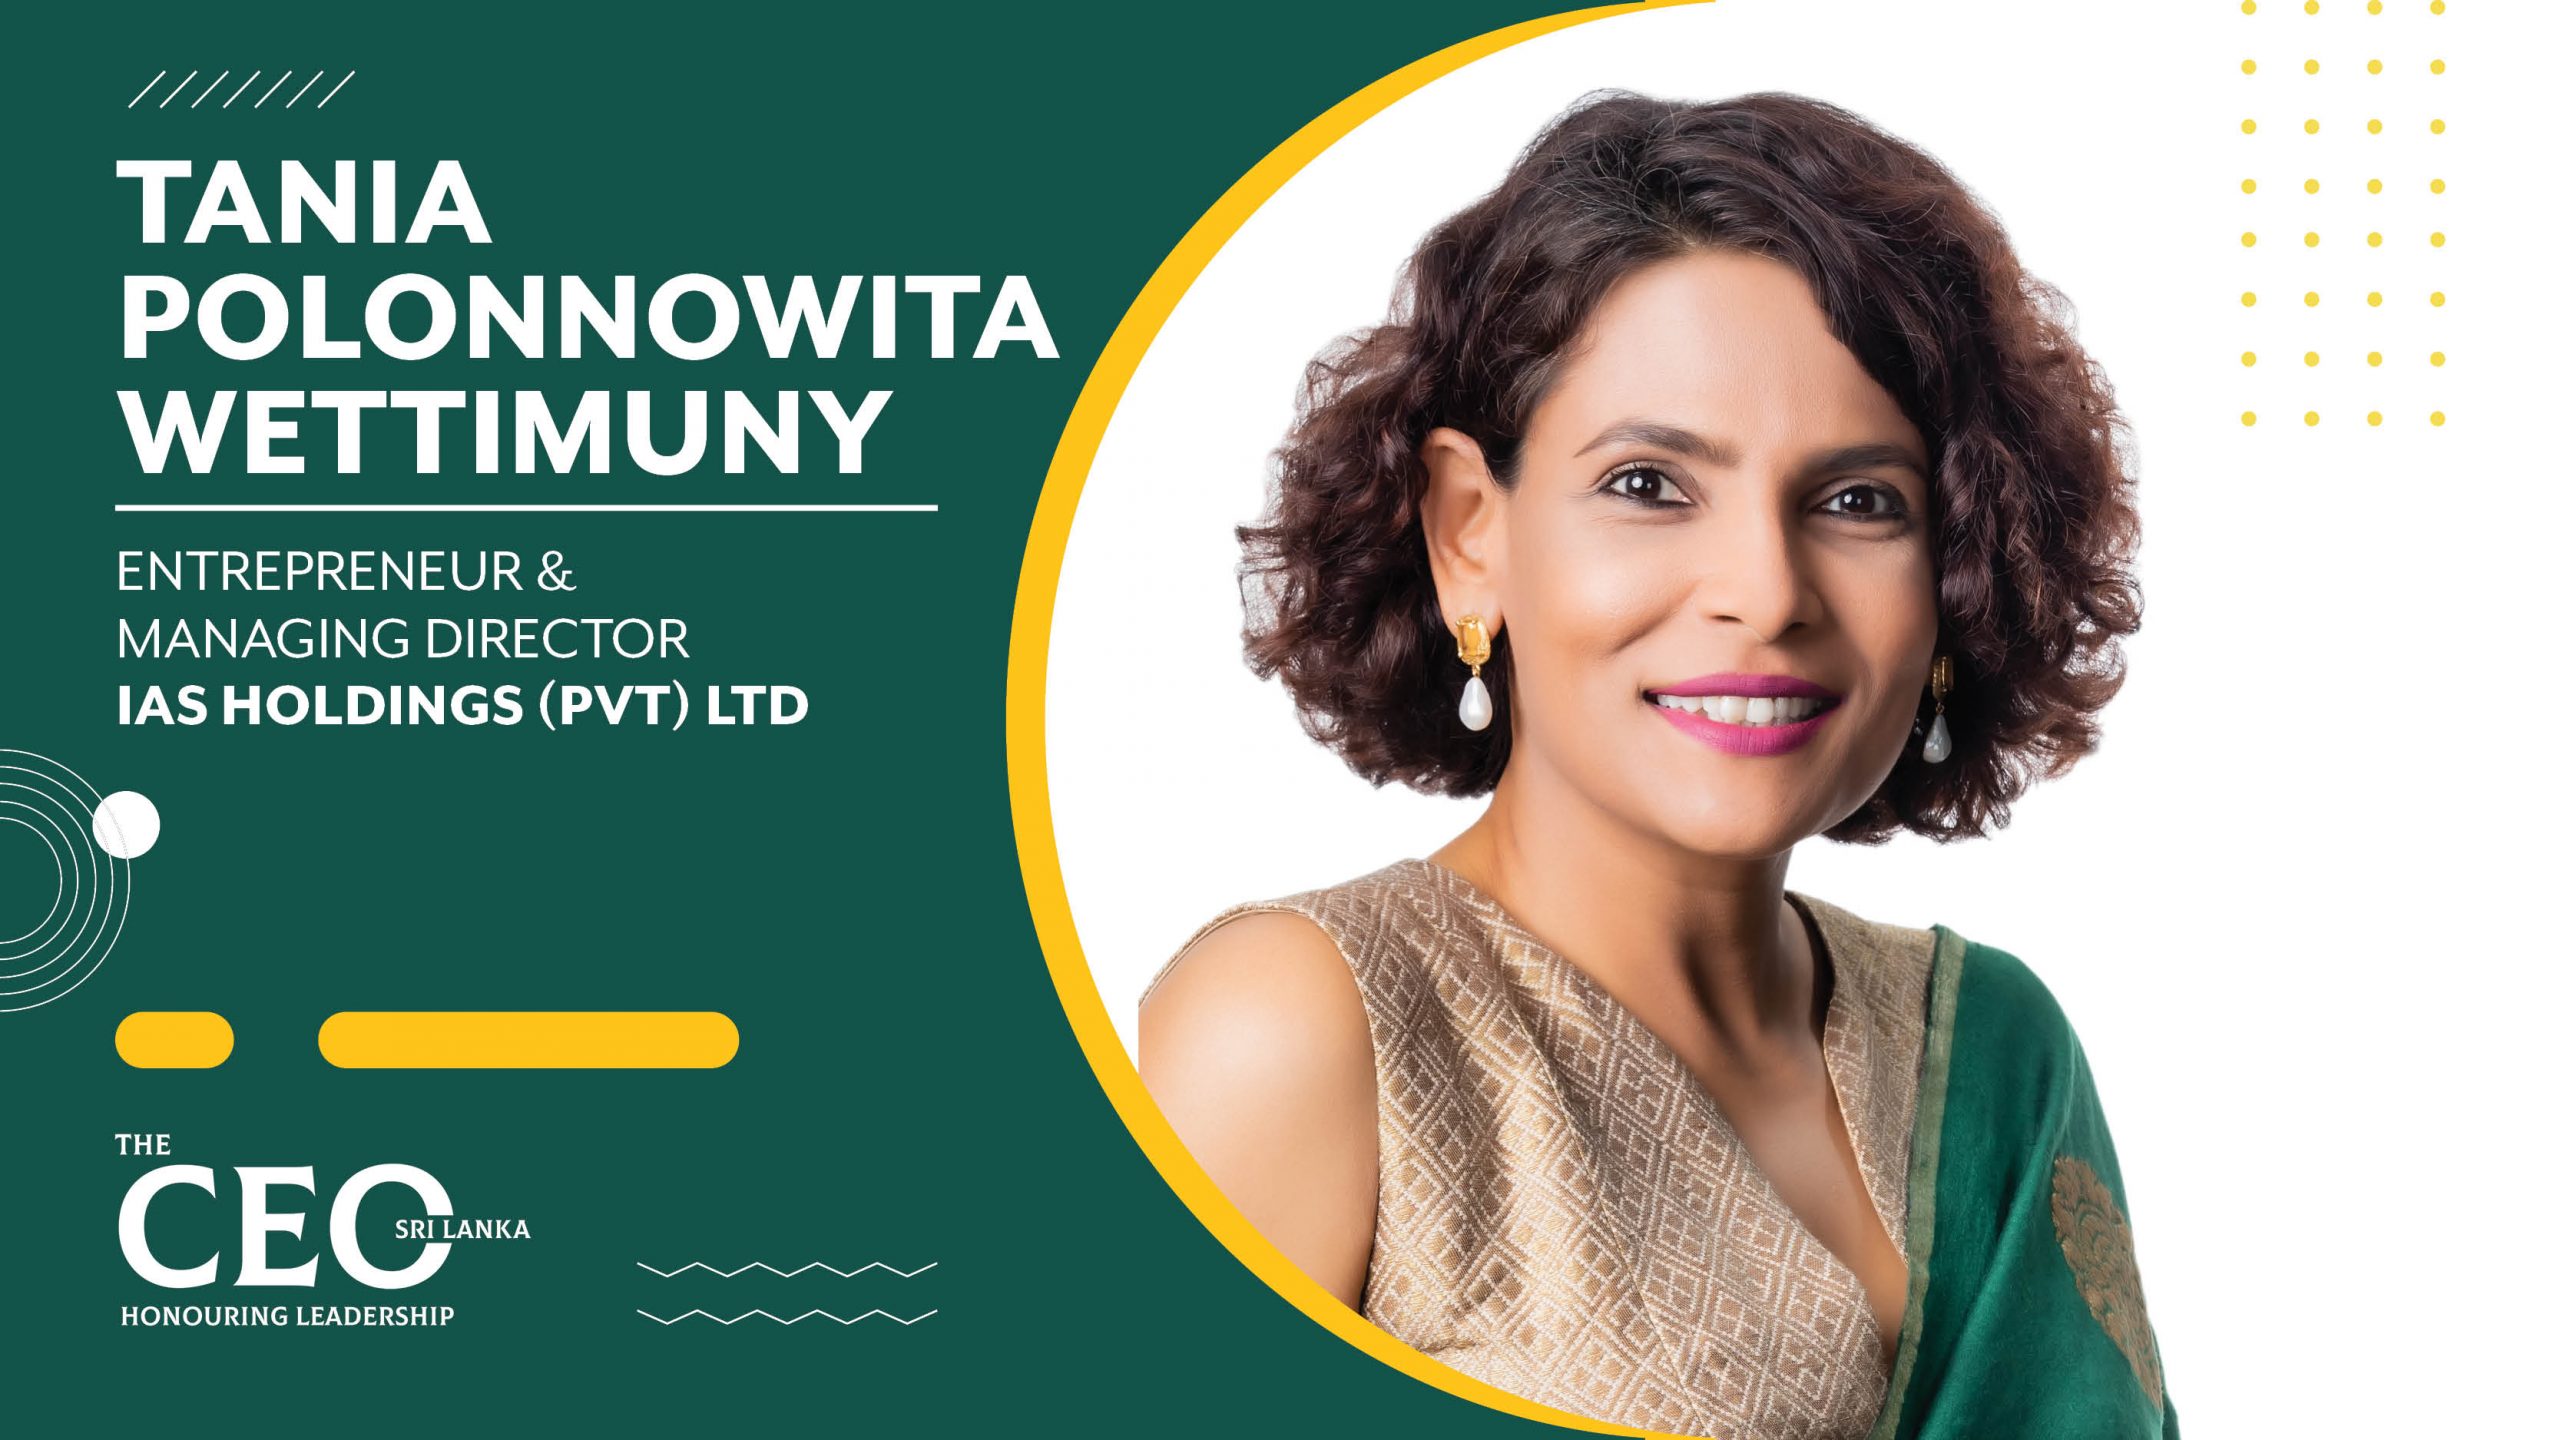 Instilling Mindfulness, Wellbeing, and Empowerment – Entrepreneur & Managing Director of IAS Holdings (Pvt) Ltd, Tania Polonnowita Wettimuny